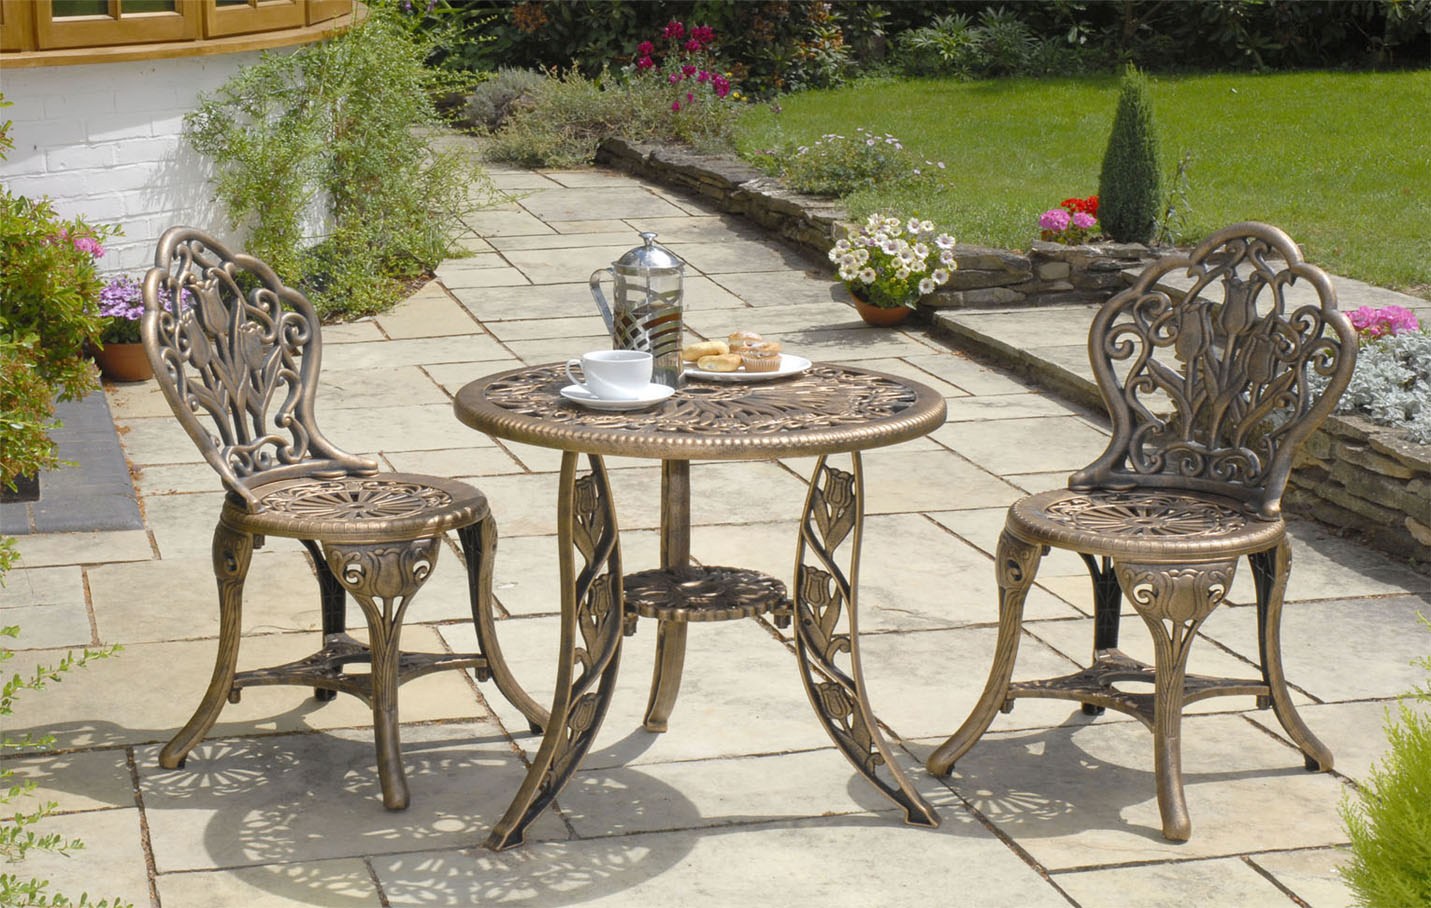 garden table and chairs garden-furniture-table-and-chairs | mobiion.com XWNQGAN